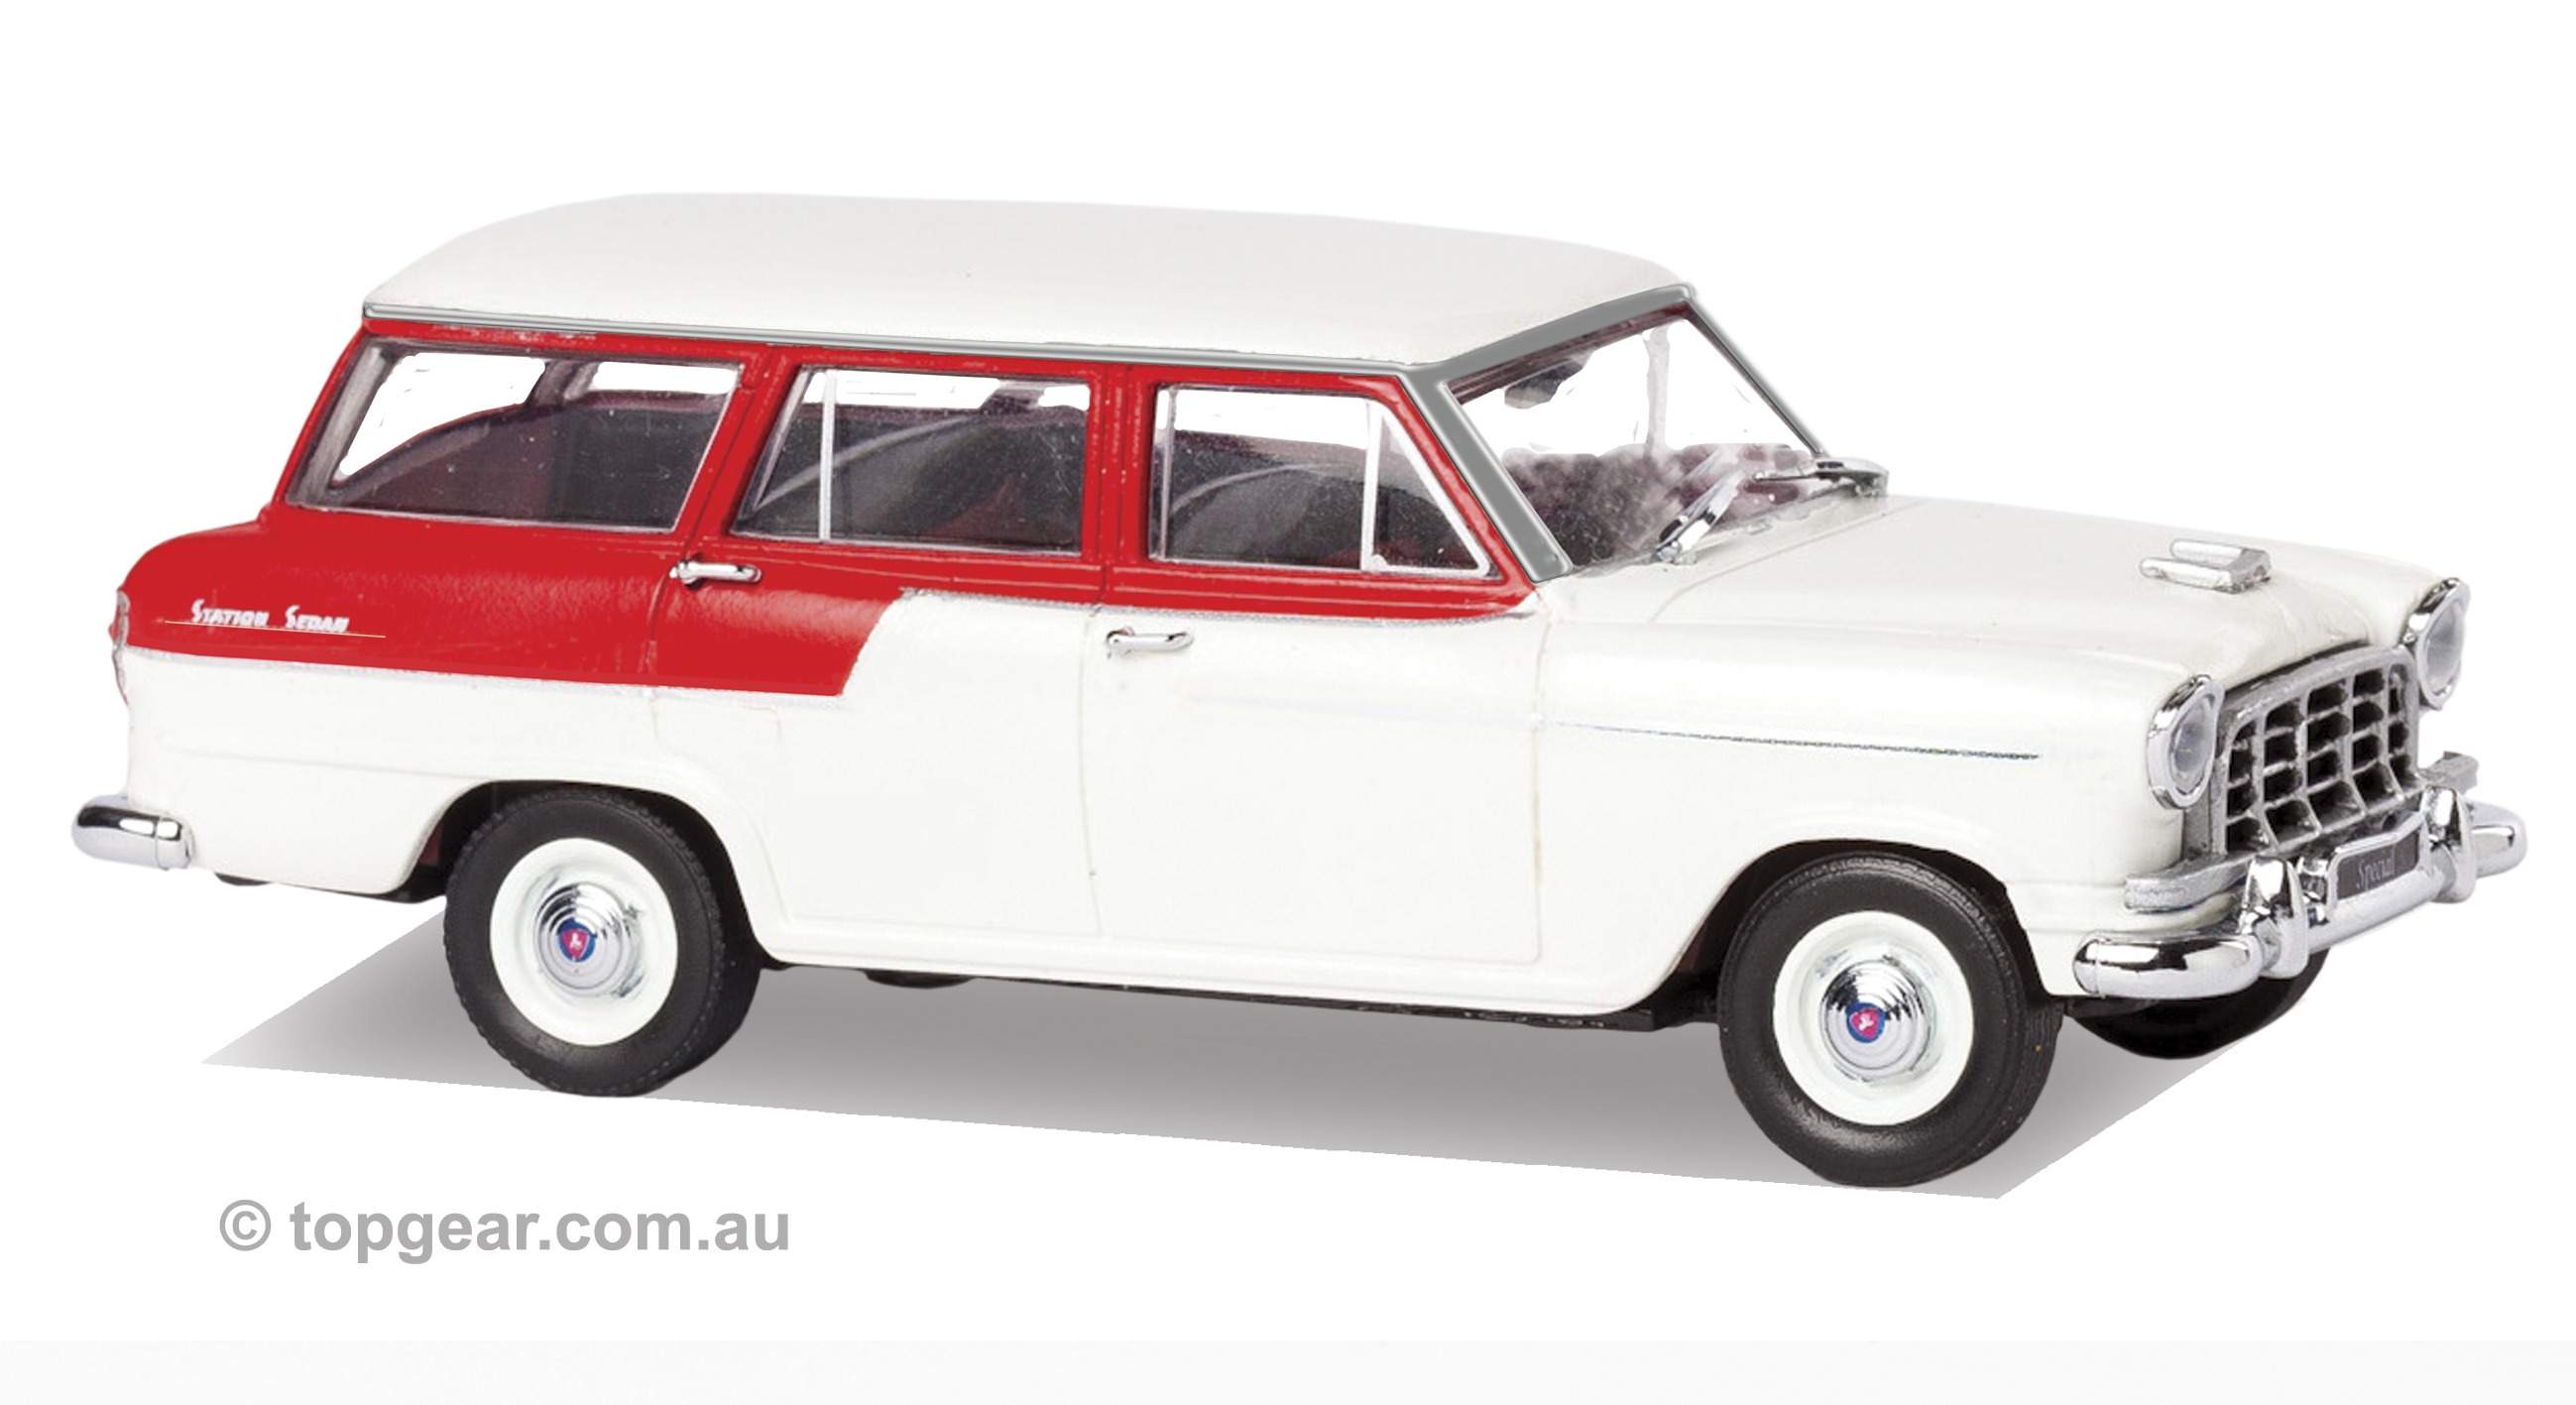 FC Holden Wagon – Red / White